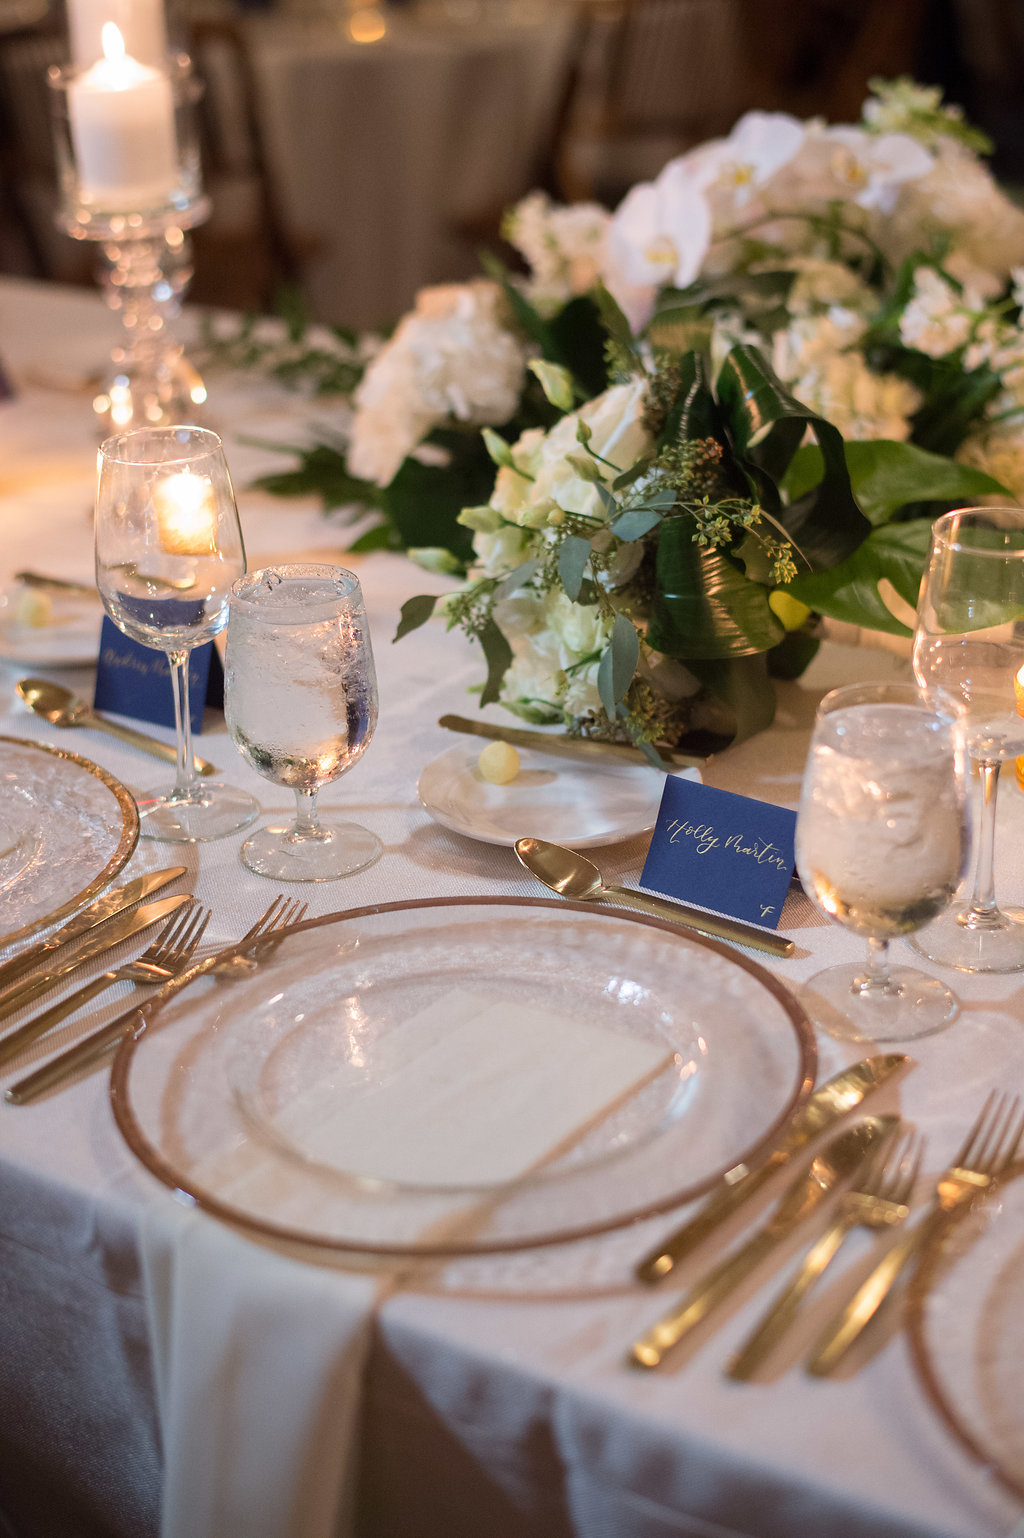 Indoor Wedding Reception Sweetheart Table Decor, Low Centerpiece with White Orchid Floral and Tropical Greenery Leaves and Clear Glass and Gold Rim Charger on White Linen | Tampa Wedding Planner Parties A La Carte | St Pete Rentals Over The Top Linen Rentals